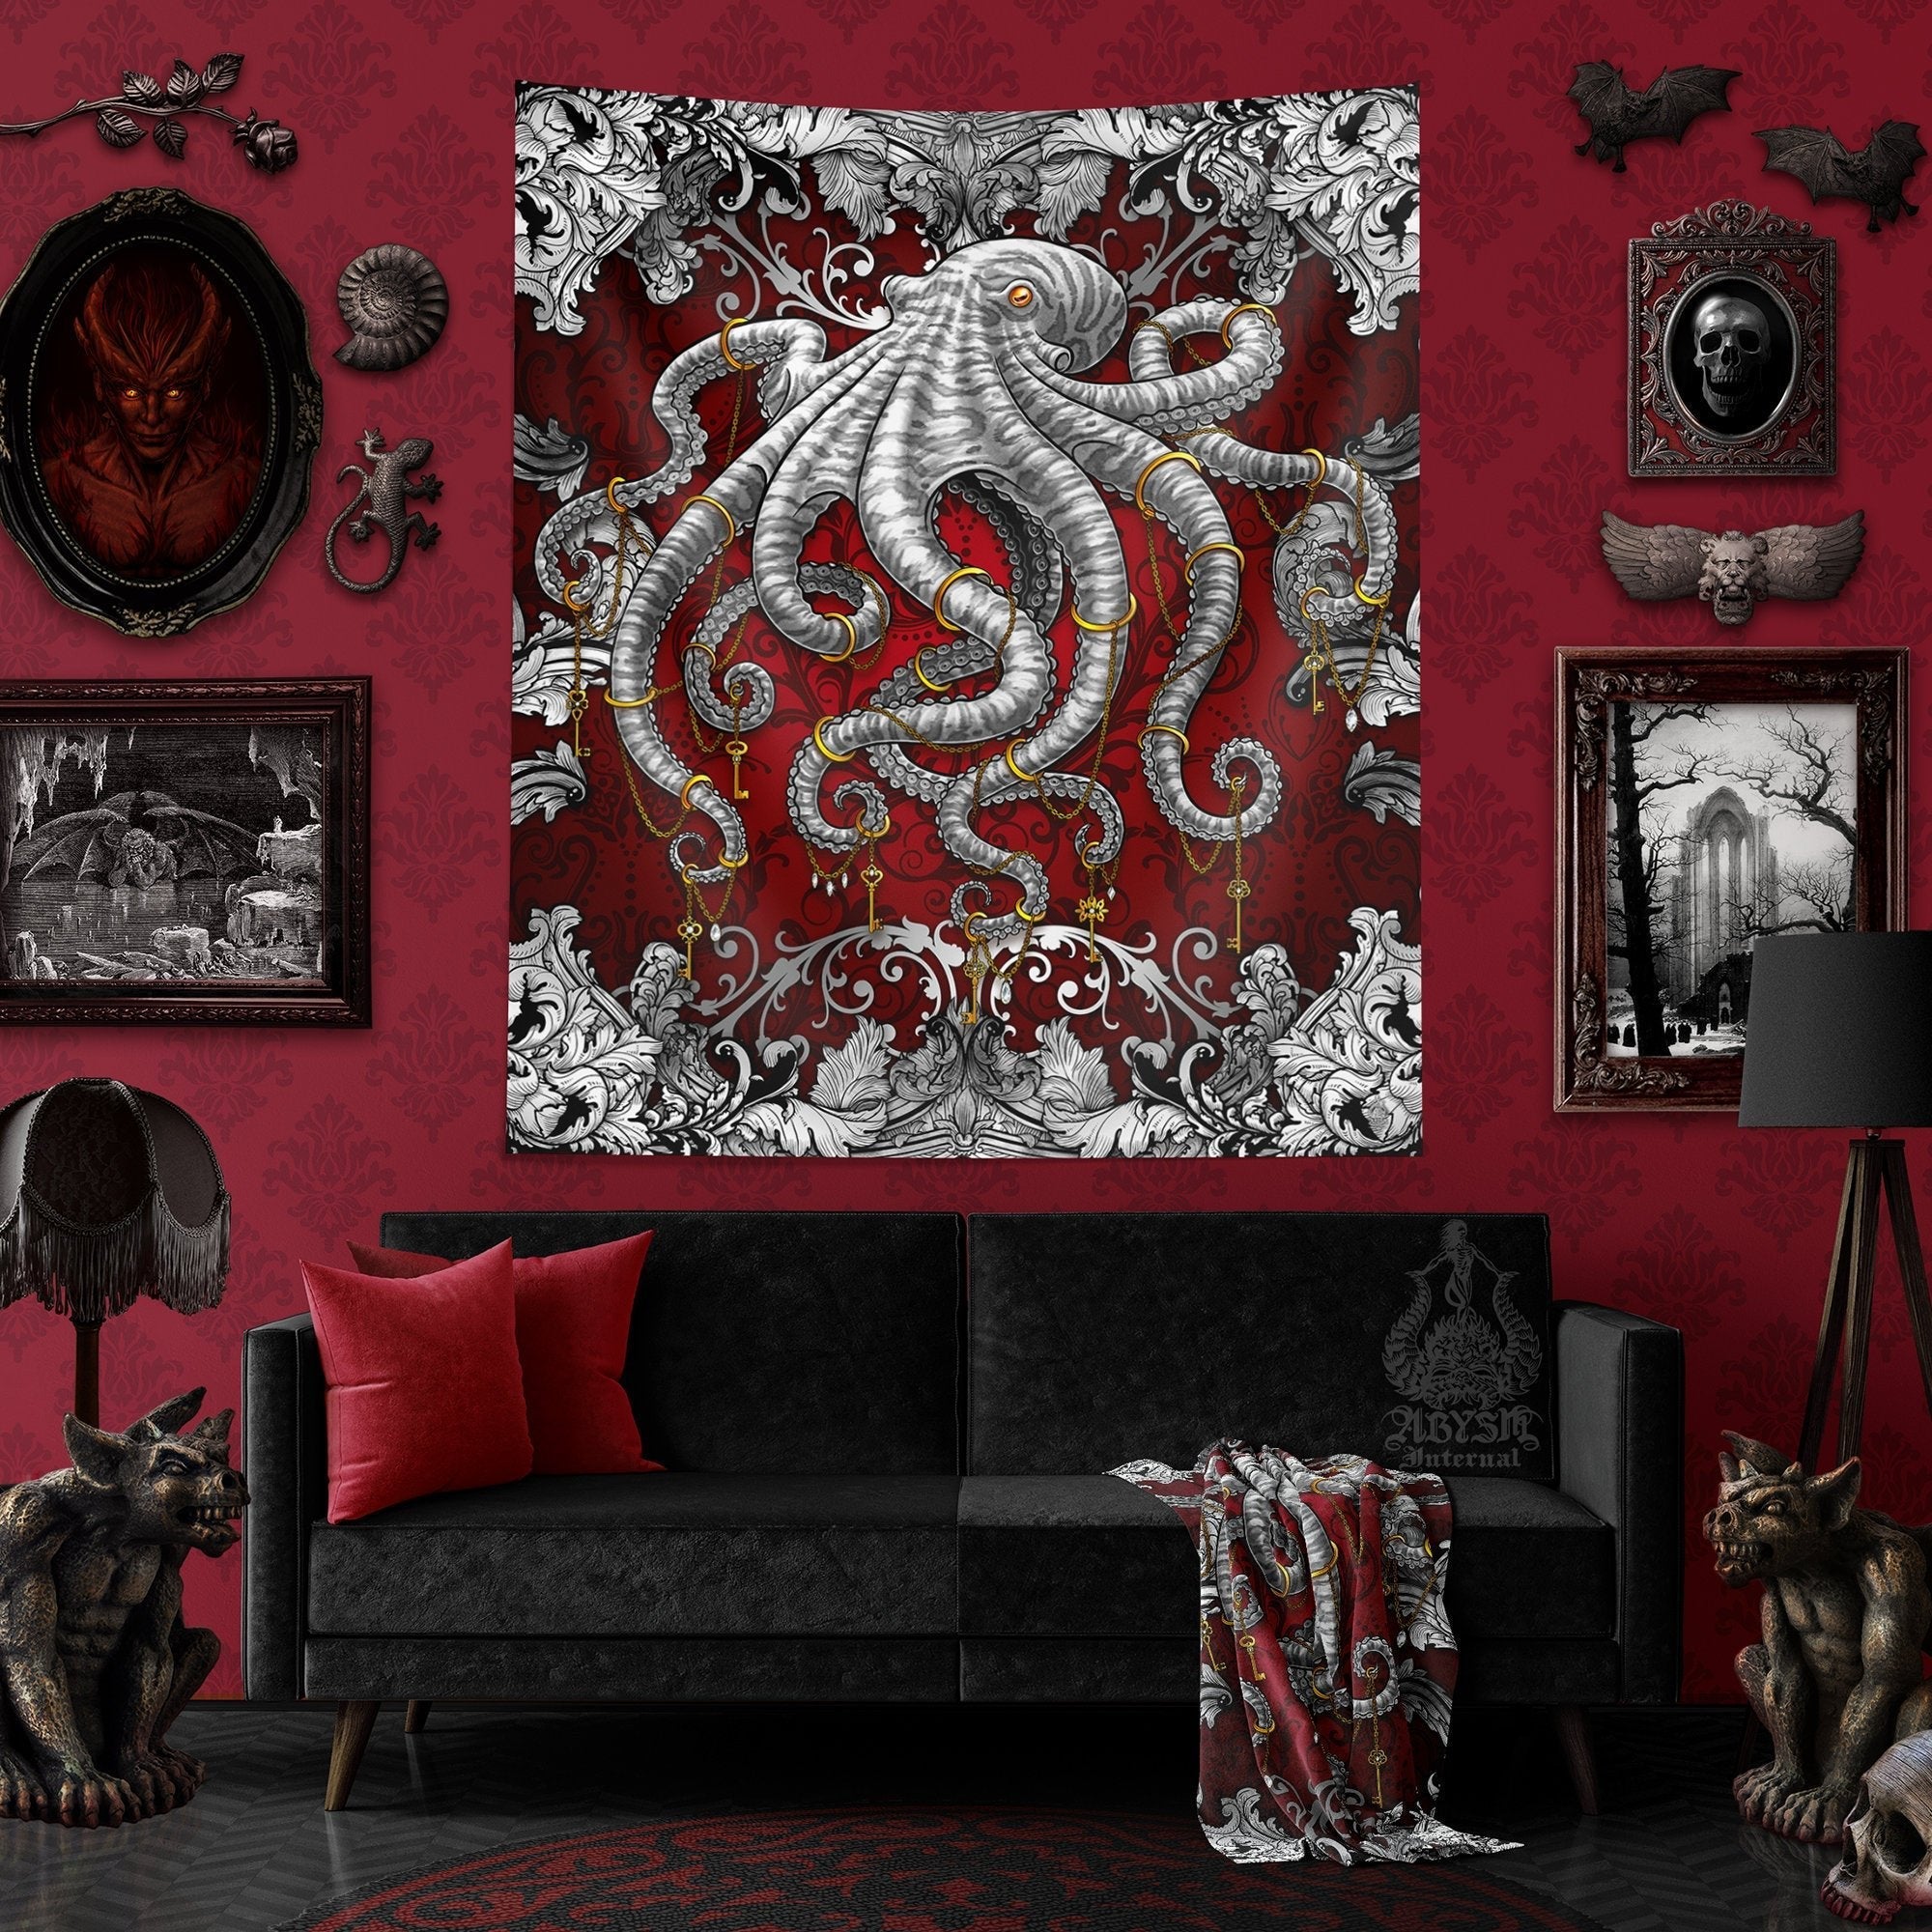 Octopus Tapestry, Coastal Wall Hanging, Beach Home Decor, Art Print - Silver Red - Abysm Internal